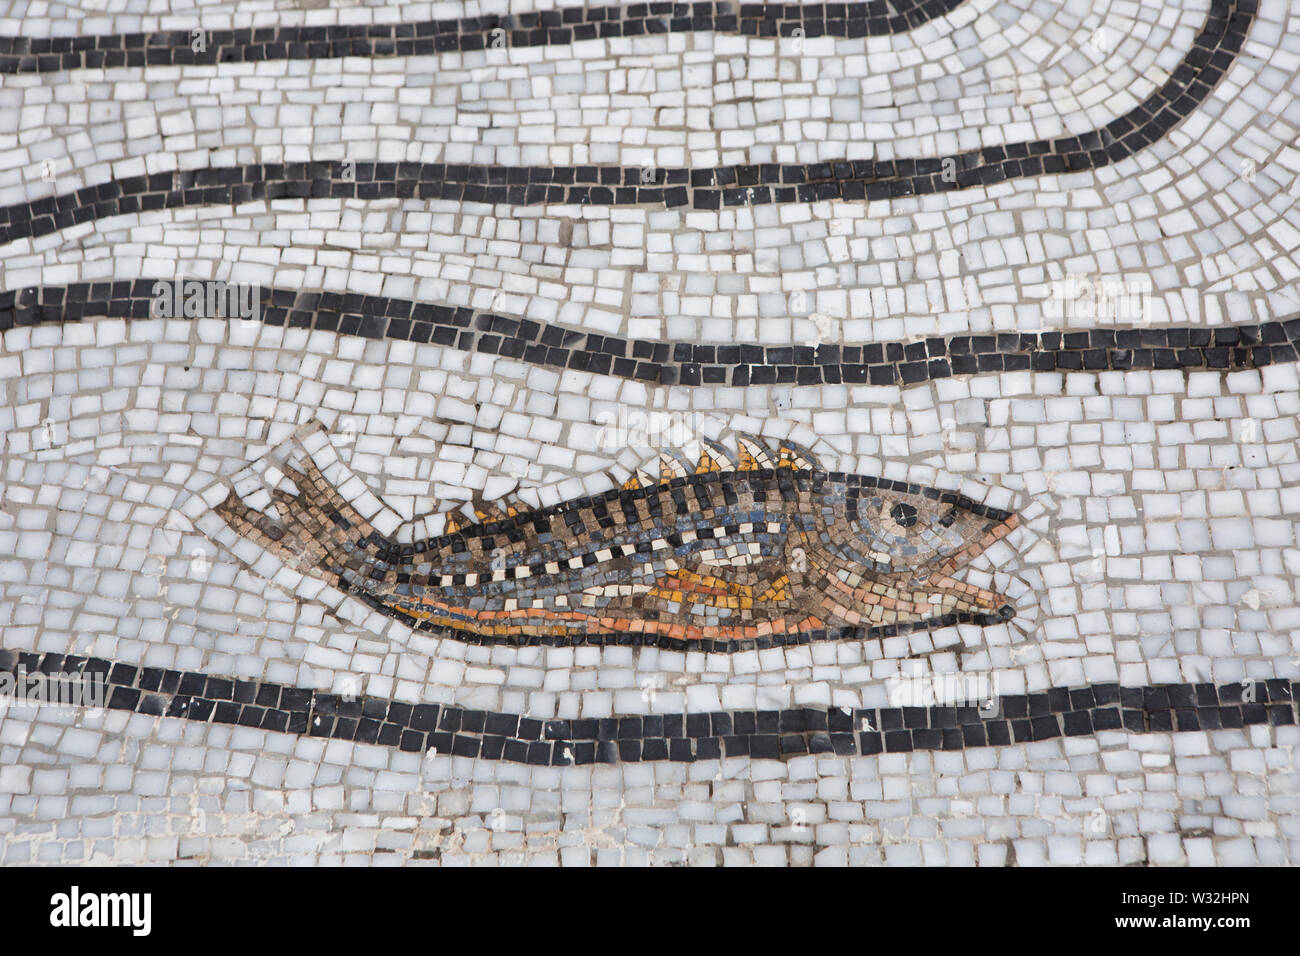 black and white mosaic with a colorful fish mosaic in Positano, on the Amalfi coast, Italy Stock Photo